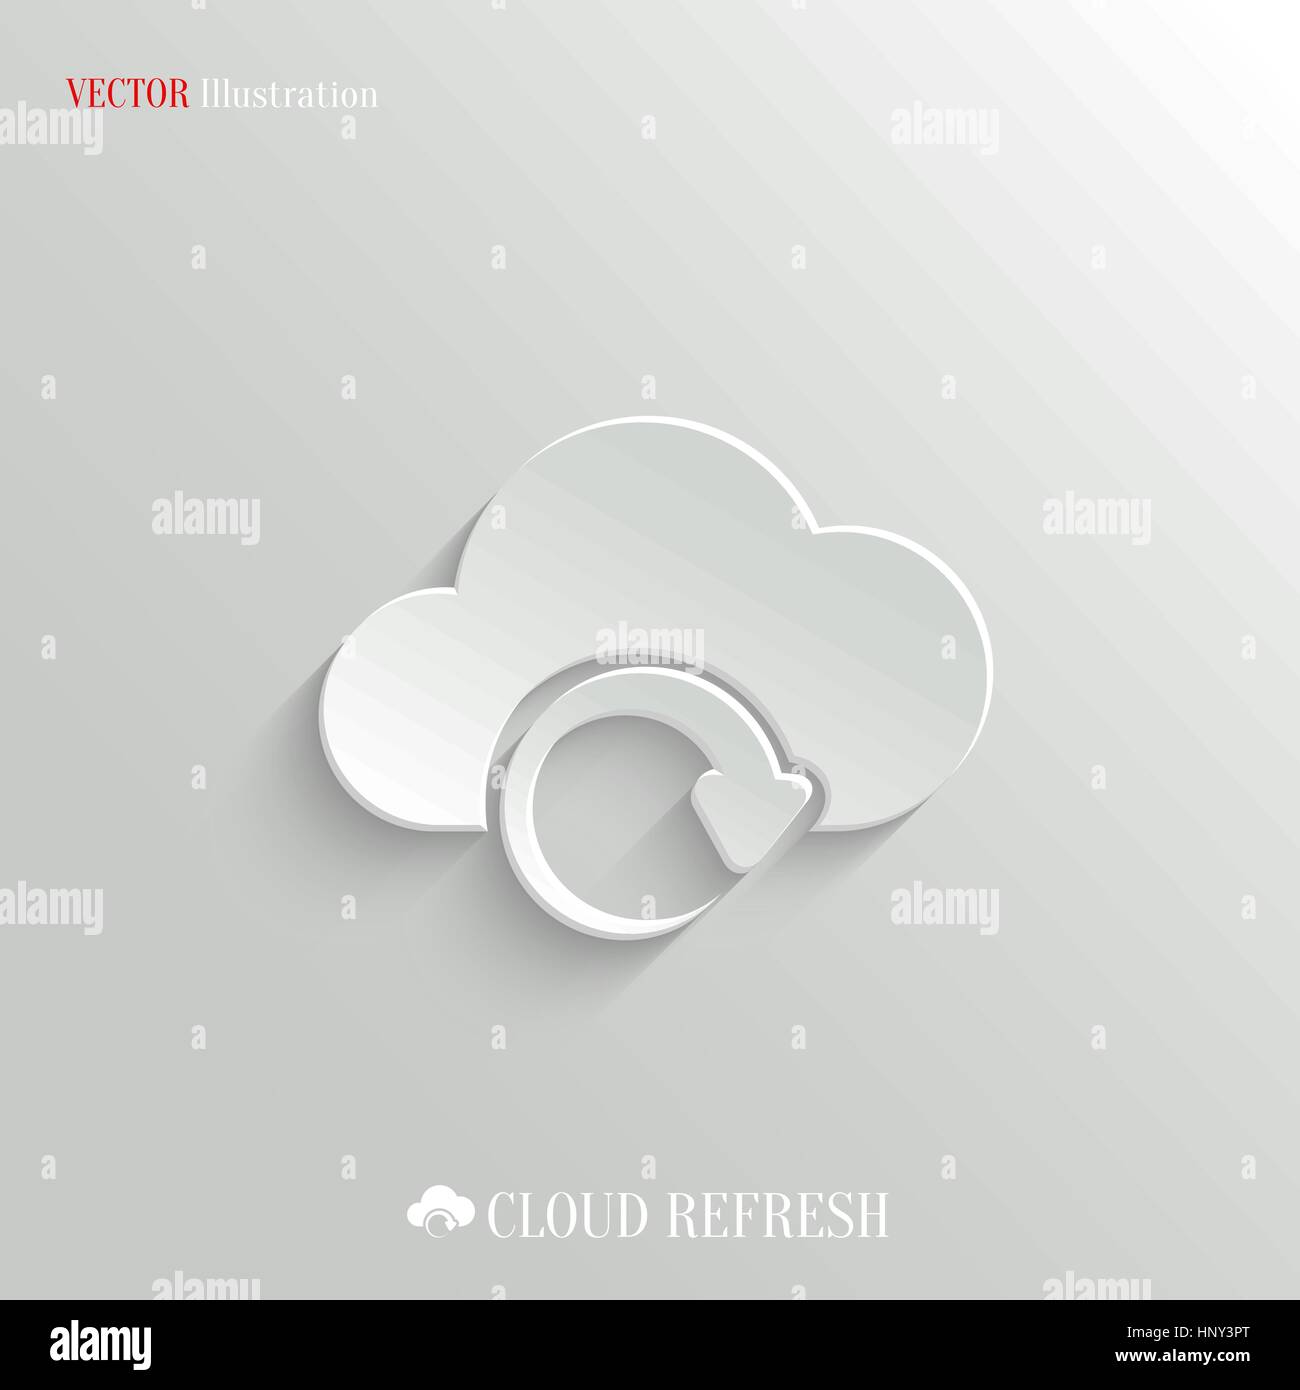 Cloud synchronization icon - vector web illustration, easy paste to any background Stock Vector